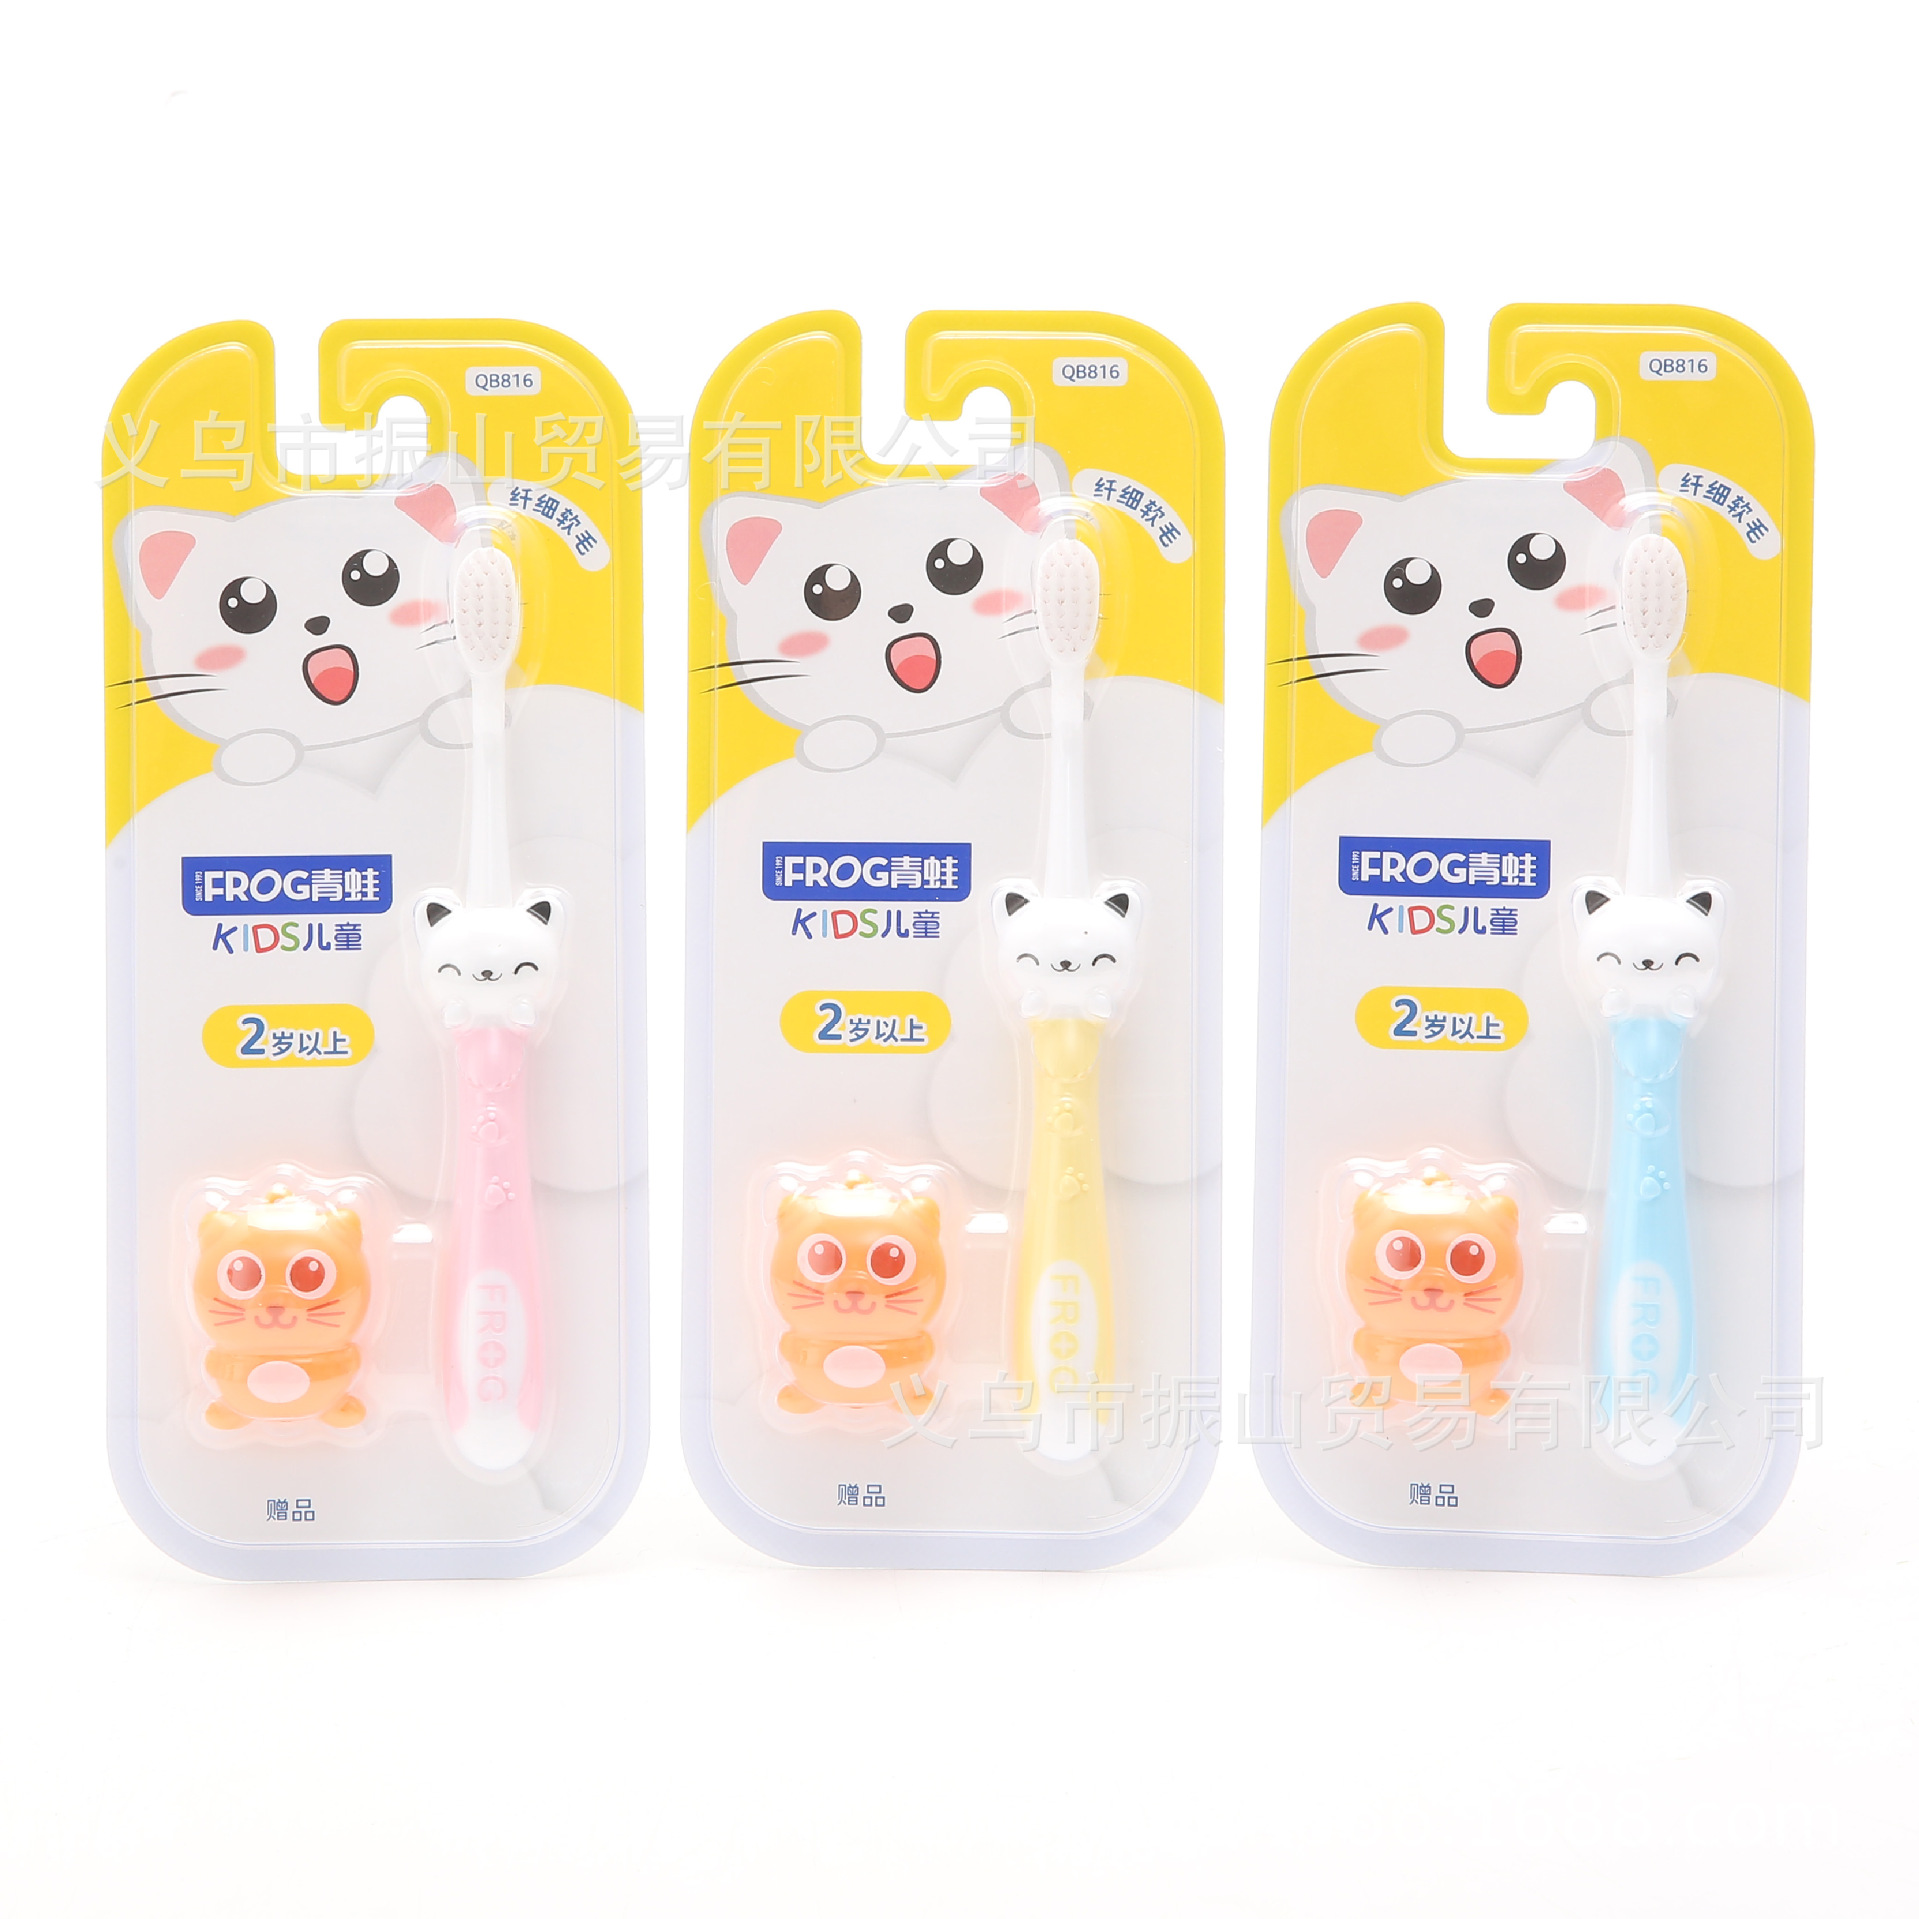 frog 816 cute cat soft and adorable handle care gum food grade contact material suitable for over 2 years old